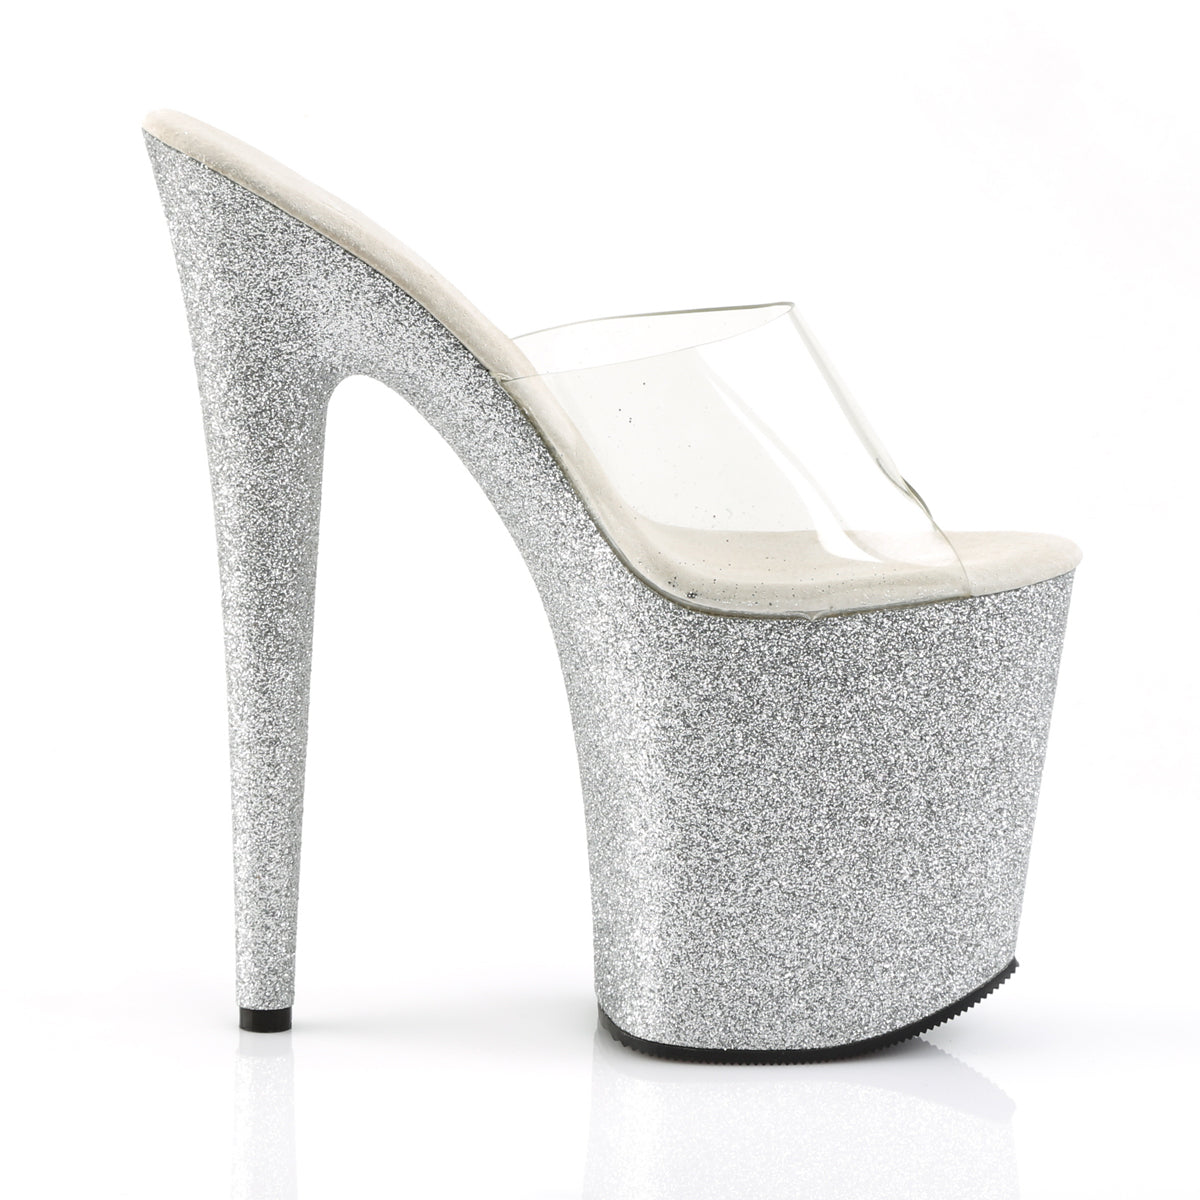 FLAMINGO-801SDG Pleaser 8" Heel Clear Silver Glitter Shoes-Pleaser- Sexy Shoes Fetish Heels